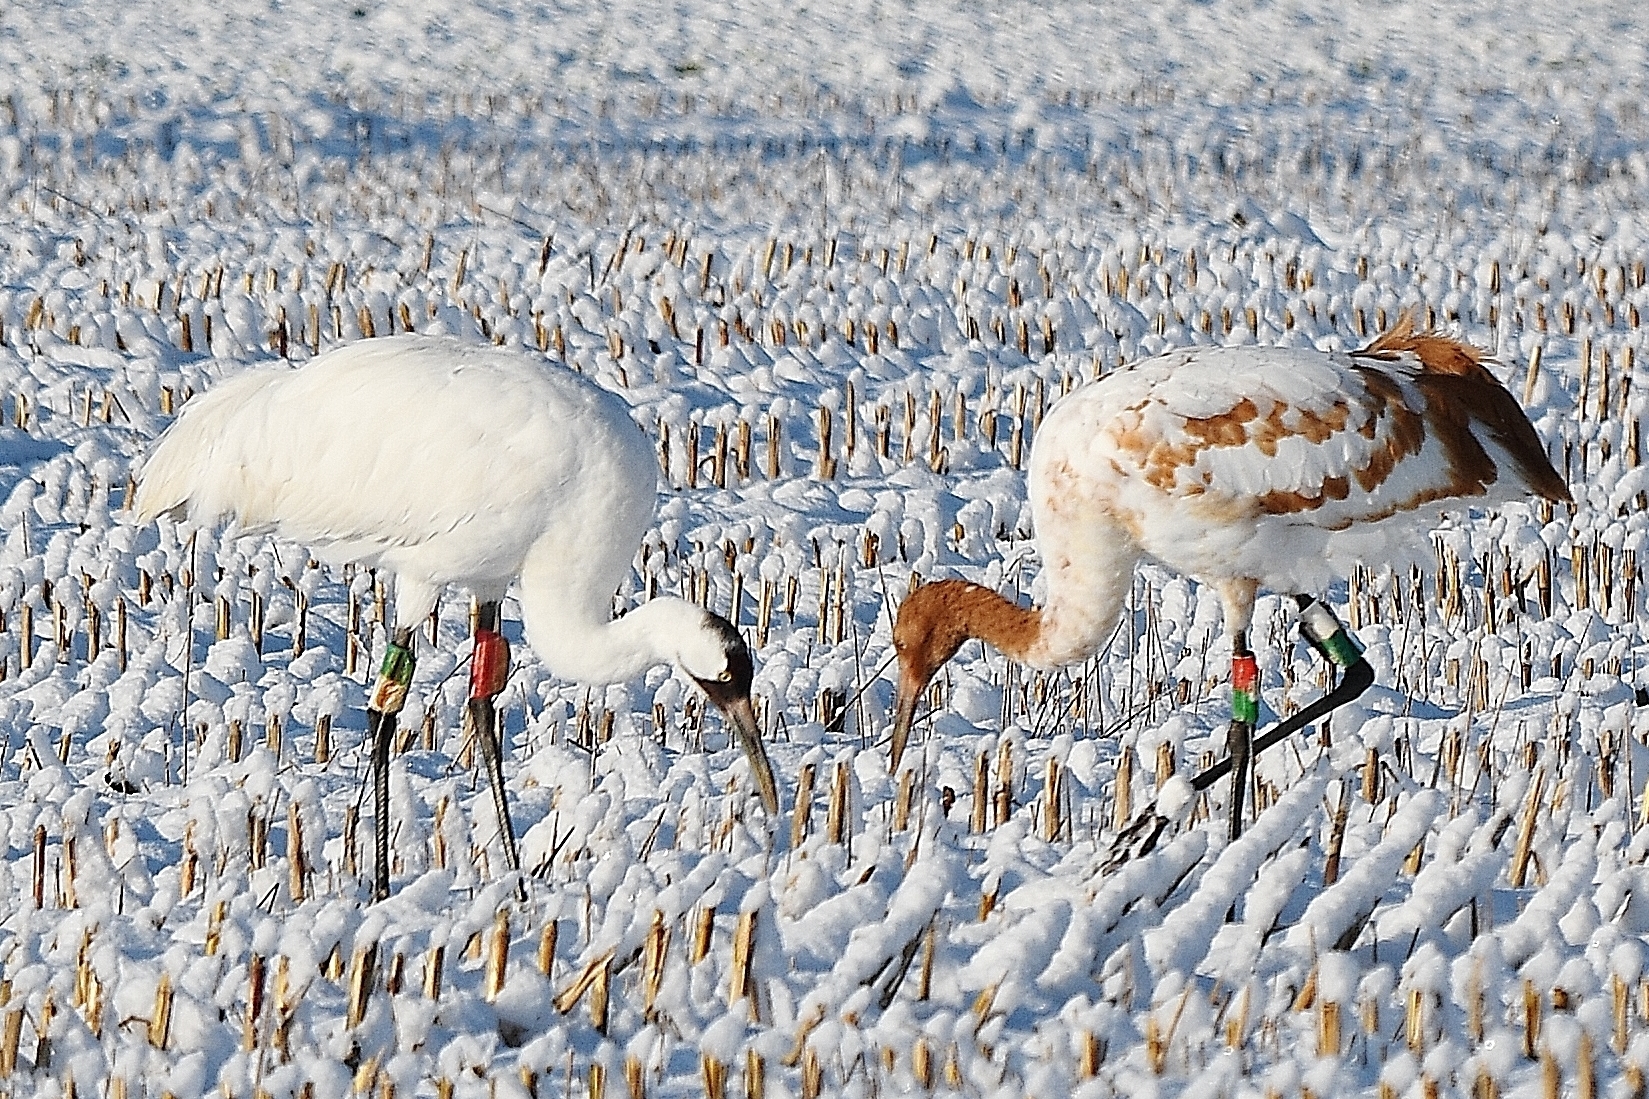 One juvenile and one adult Whooping Crane foraging in the snow.